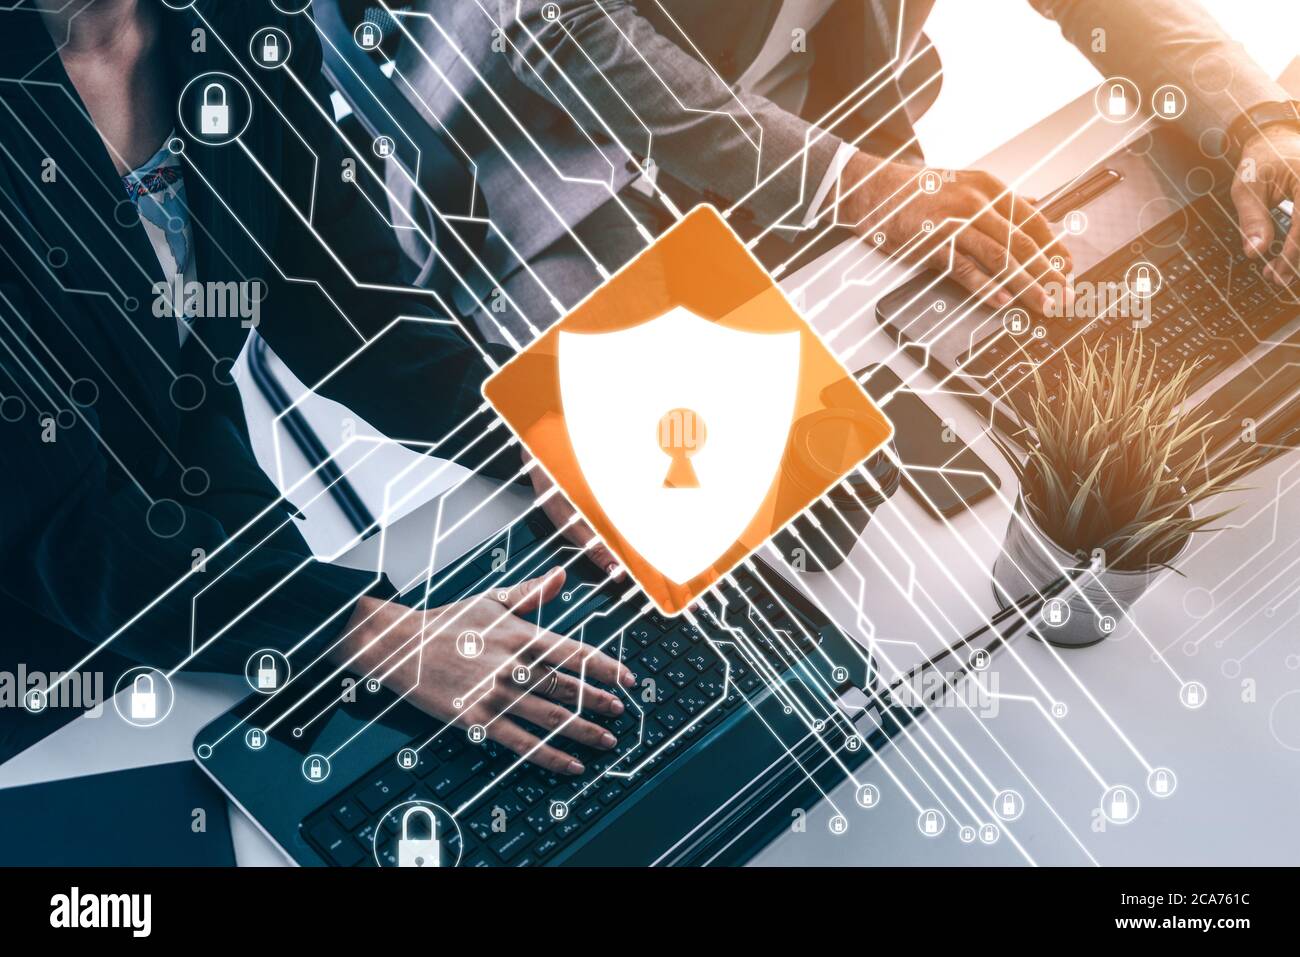 Cyber Security and Digital Data Protection Concept Stock Photo